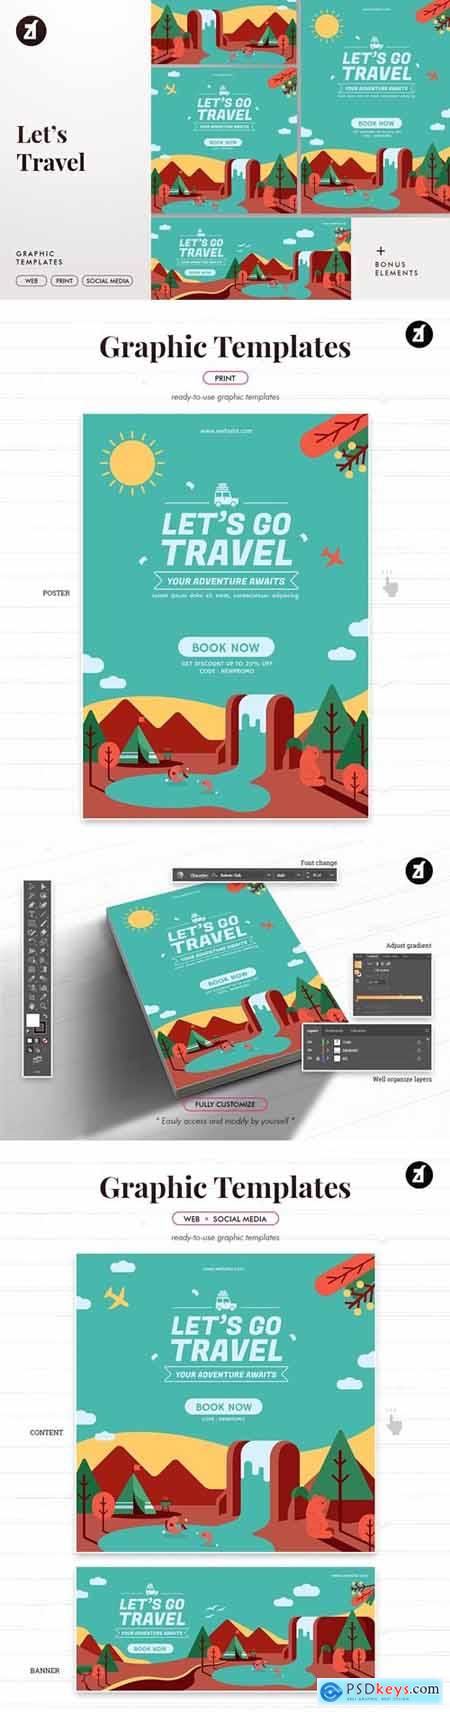 Let's travel graphic templates